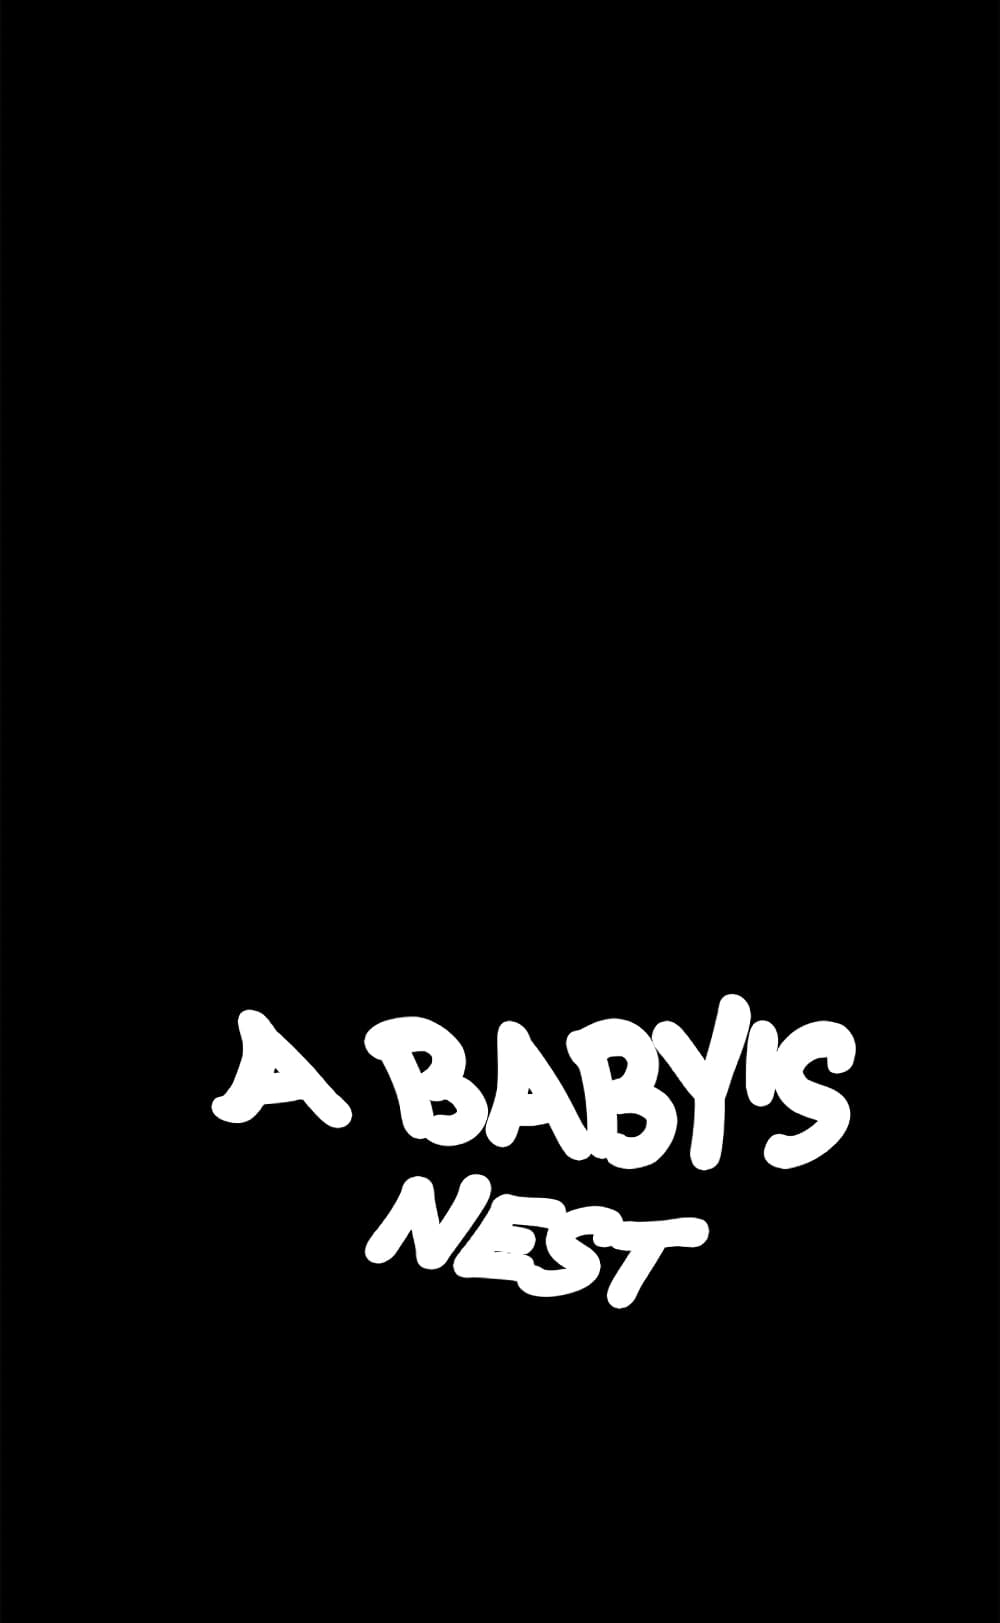 A Baby's Nest 7-7